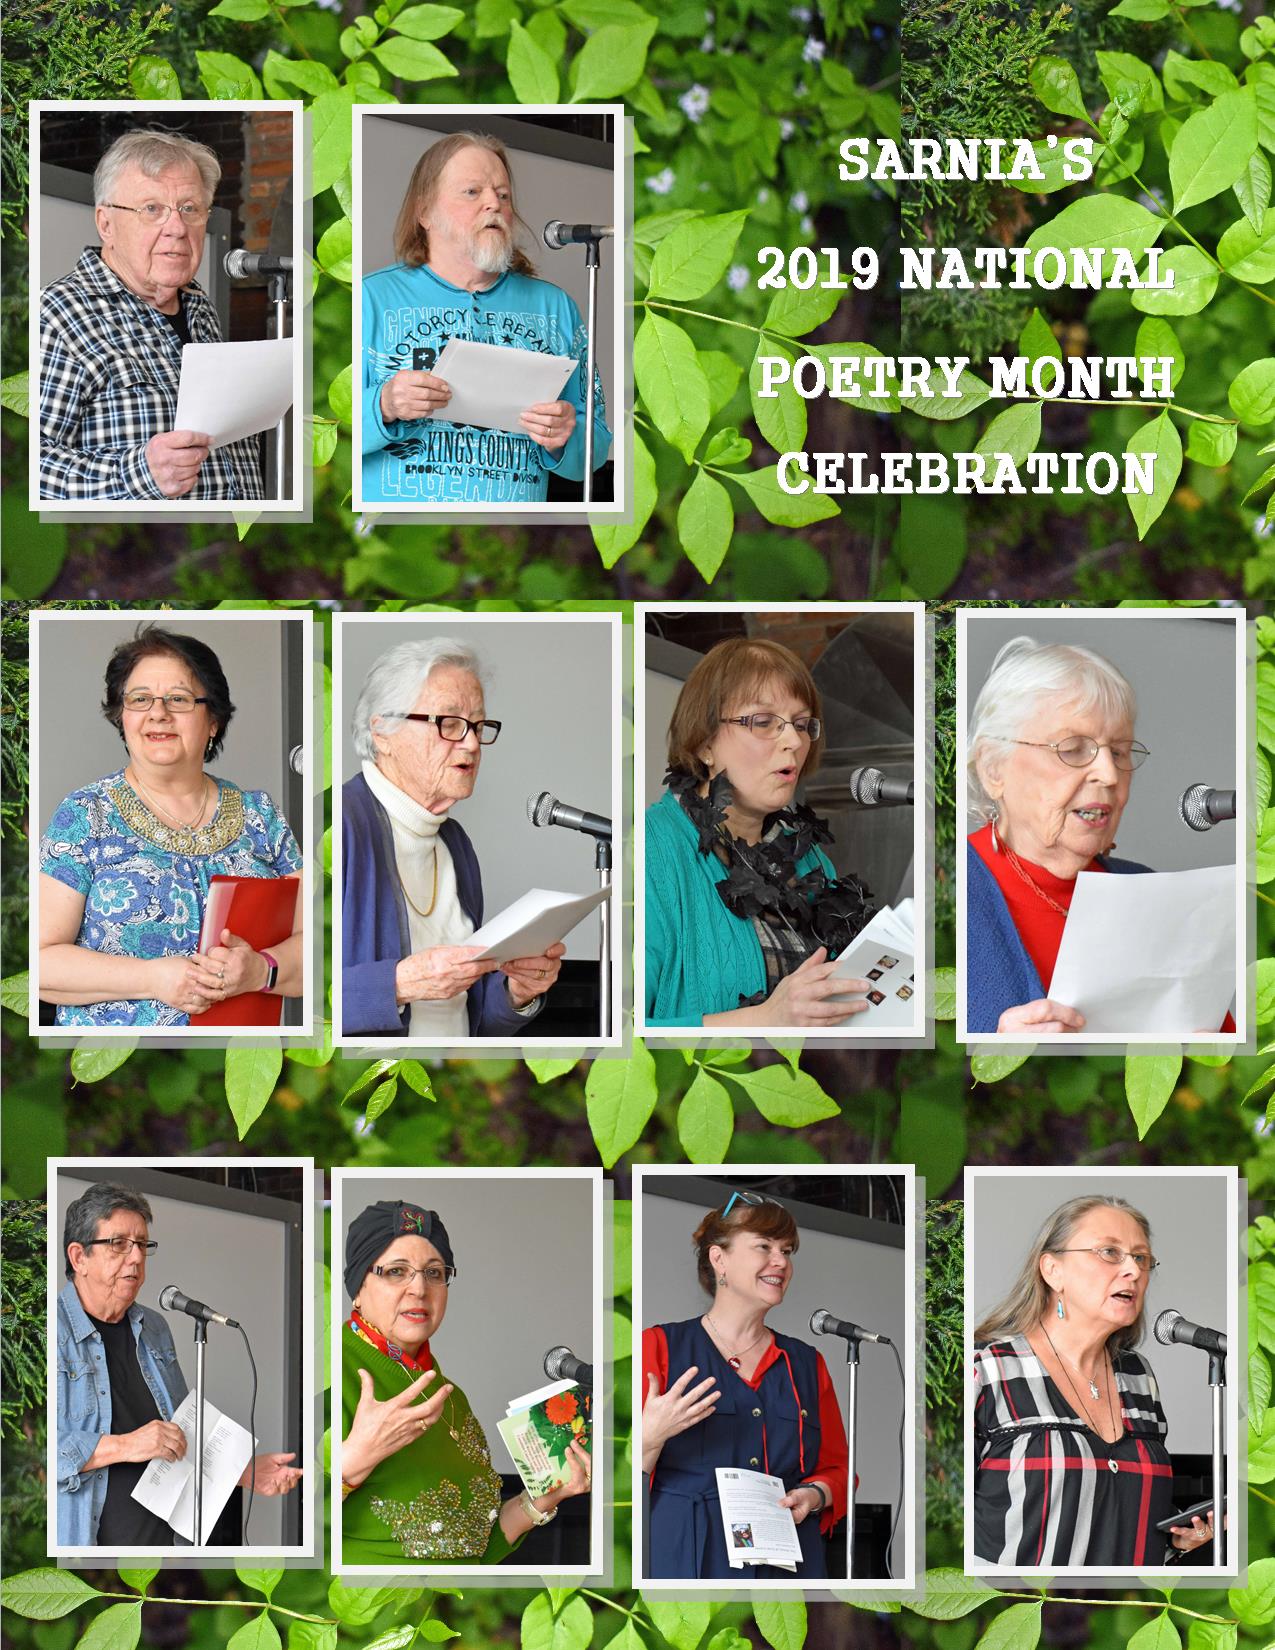 Sarnia's National Poetry Month 2019 with 10 marathon readers